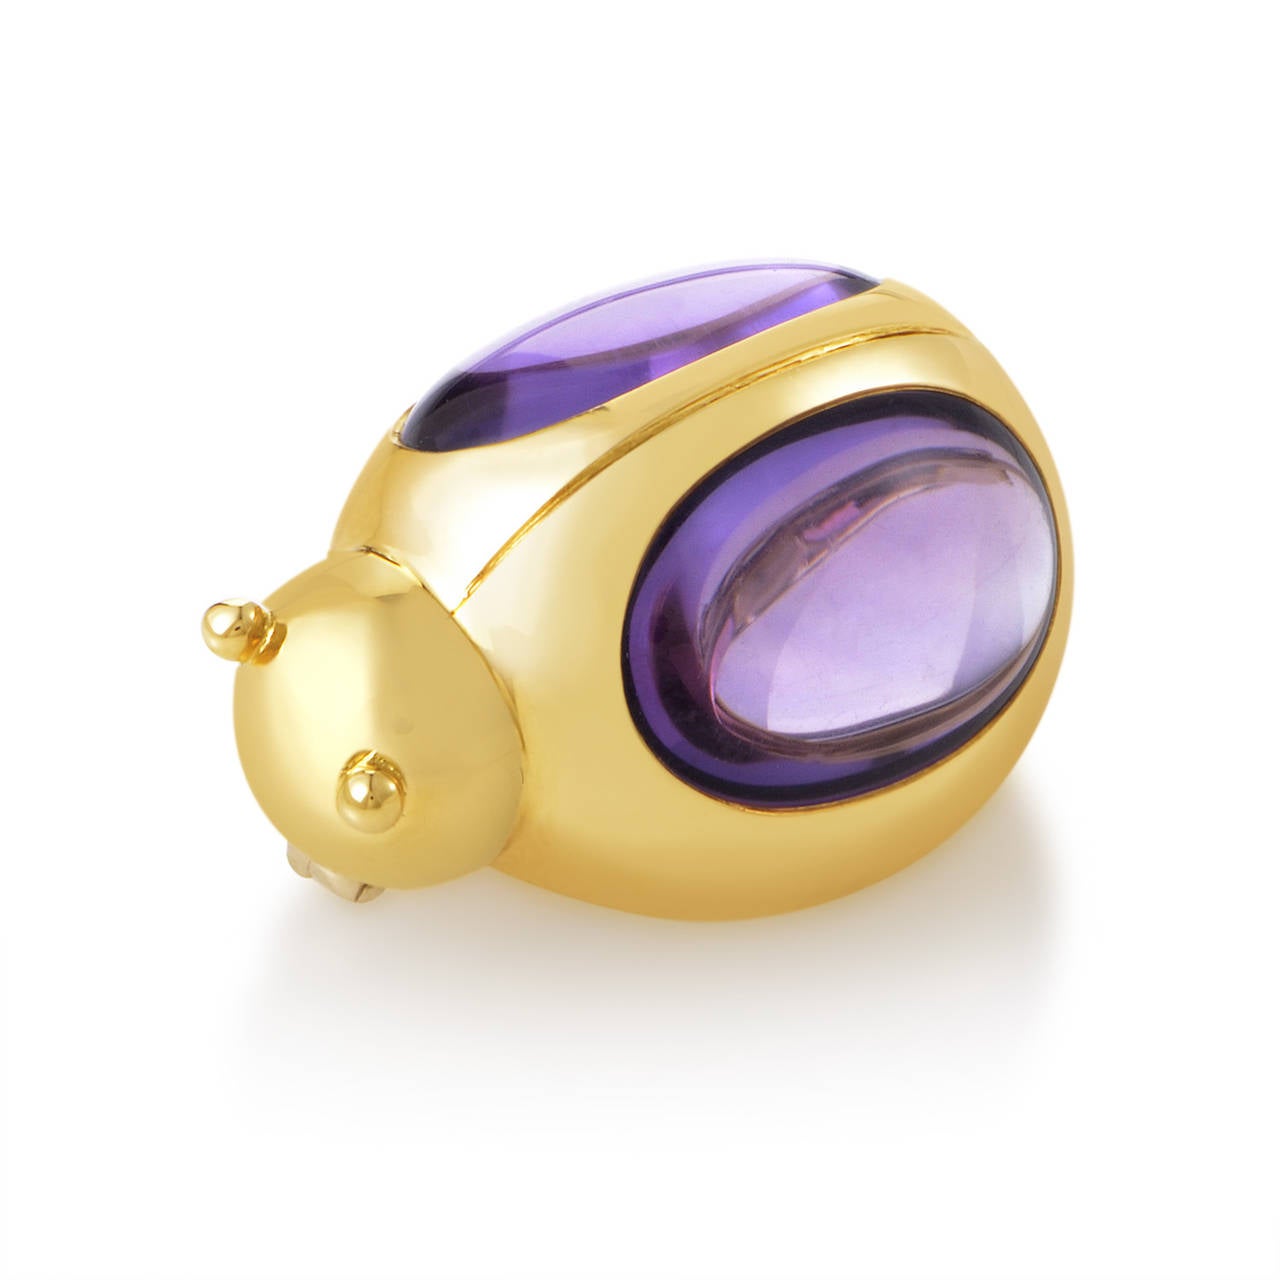 This pin fro Poemellato has a pretty purple design that is sure to catch your eye! The pin is made of 18K yellow gold and is set with two amethyst cabochons.